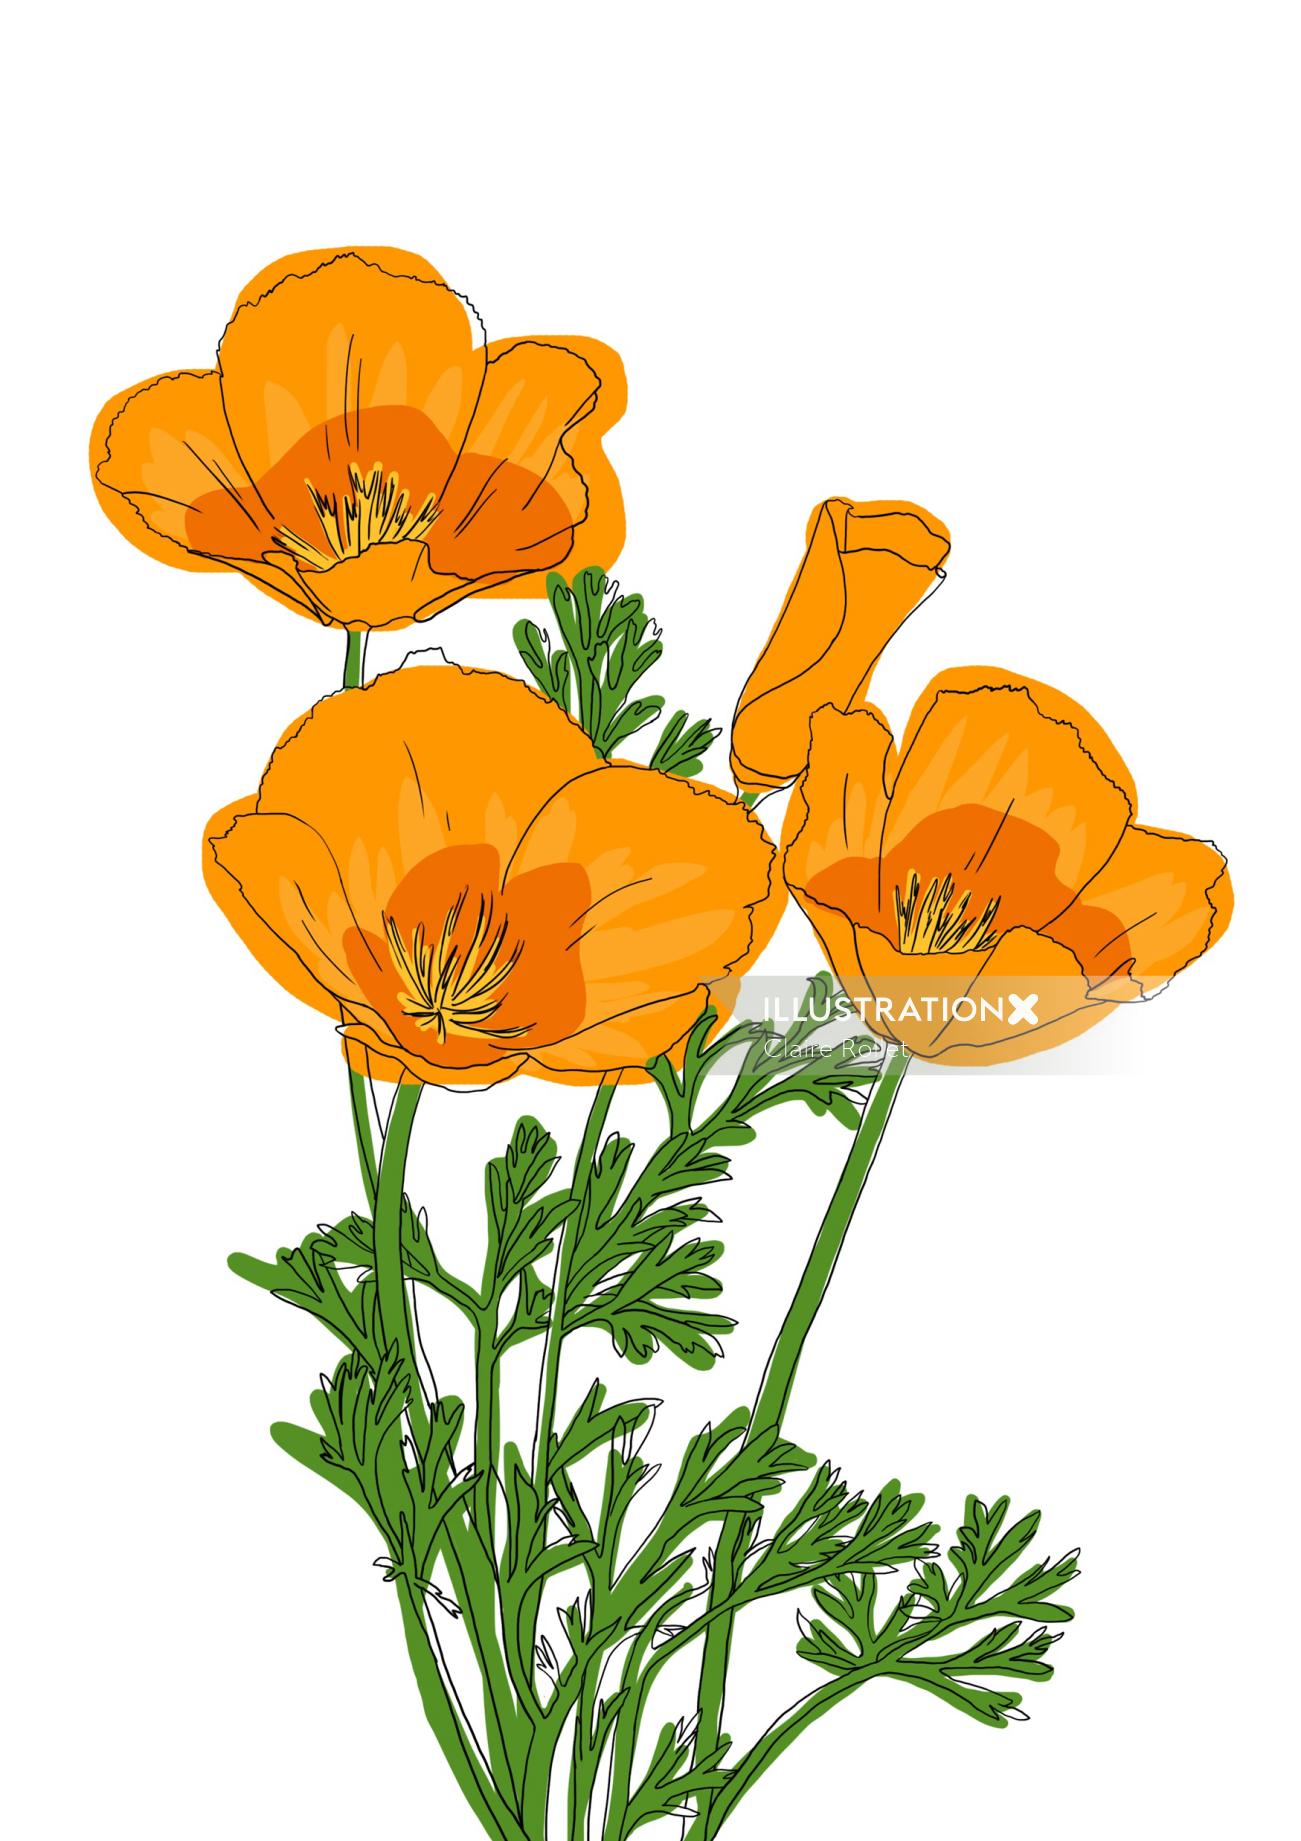 Illustration in line and color of the California Poppy bloom